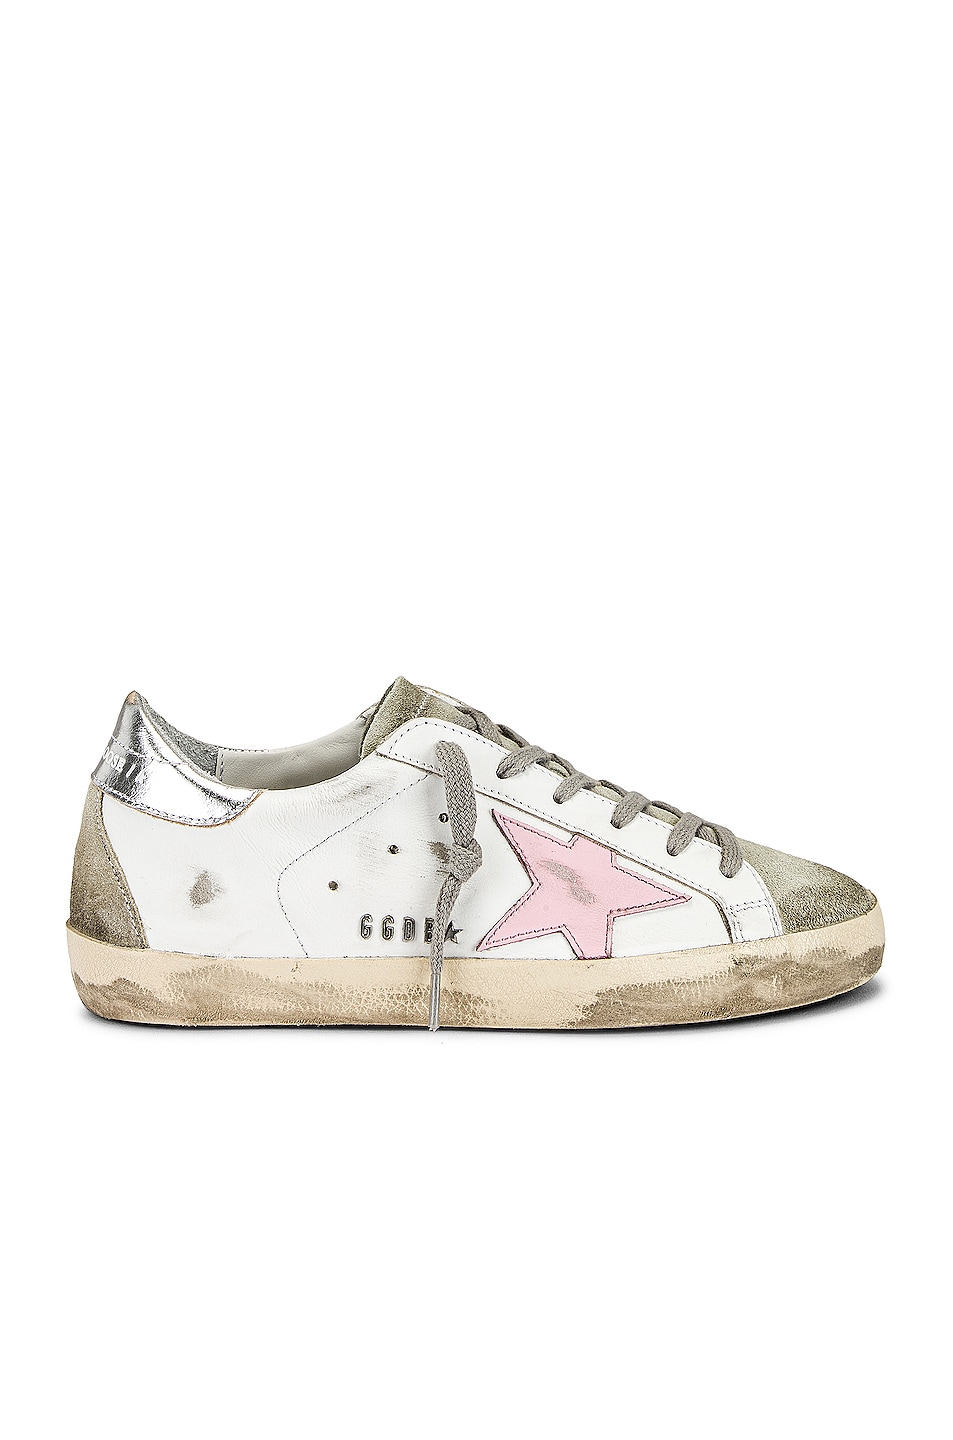 Image 1 of Golden Goose Superstar Sneaker in White, Ice, Orchid Pink, & Silver